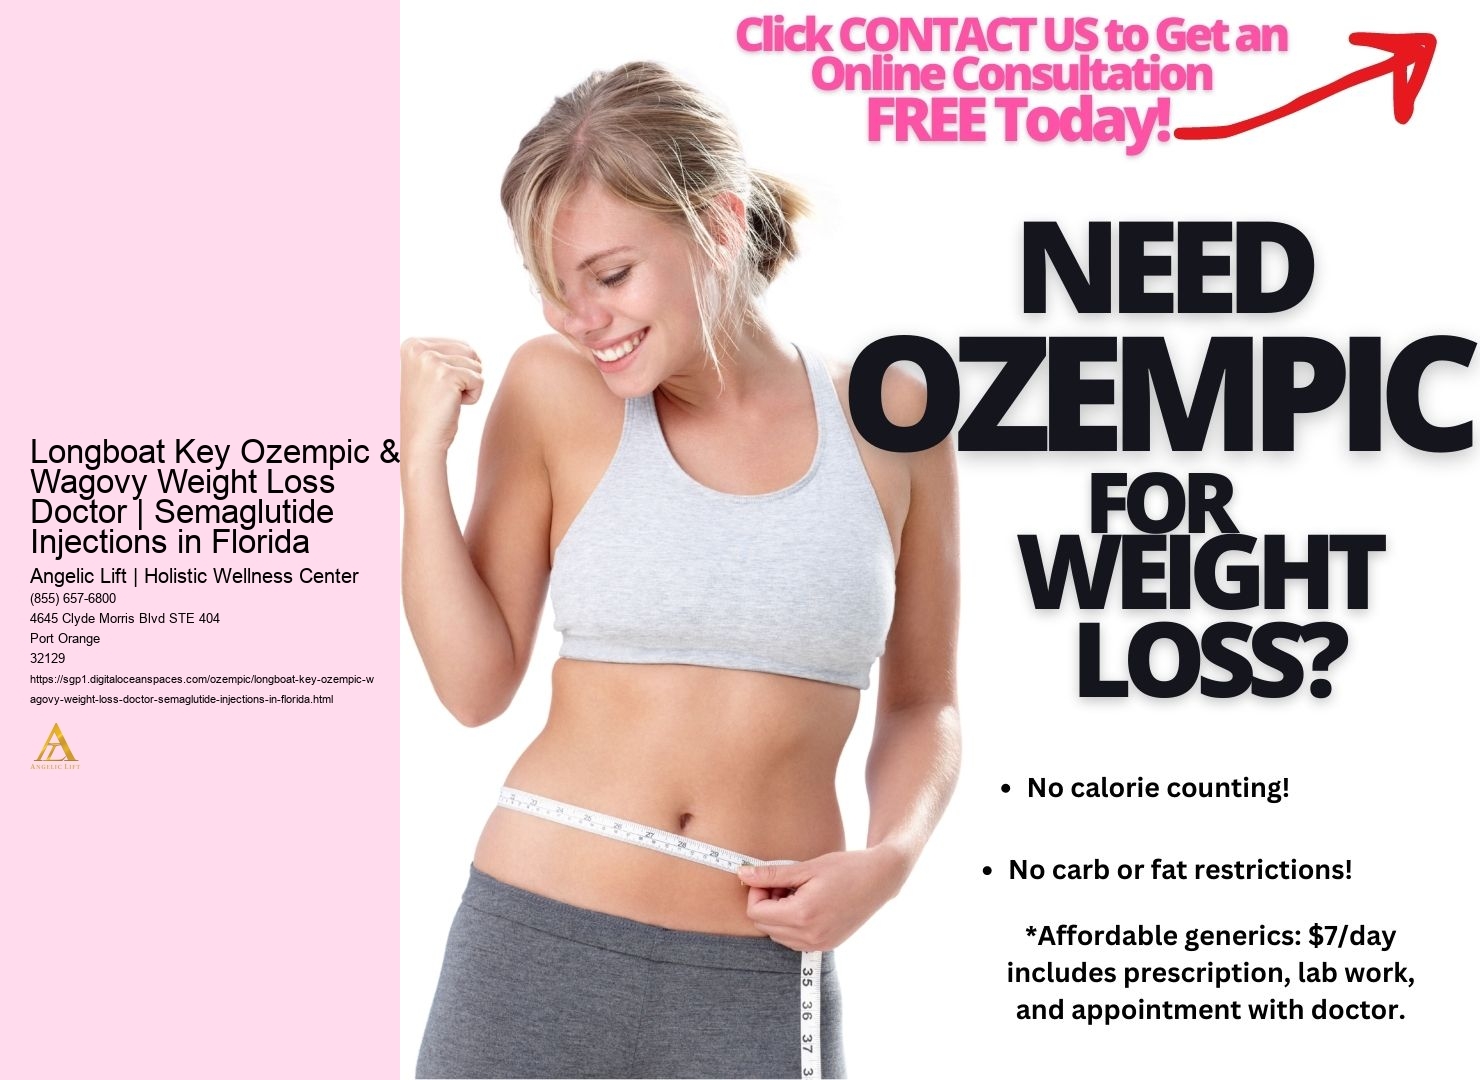 Longboat Key Ozempic & Wagovy Weight Loss Doctor | Semaglutide Injections in Florida